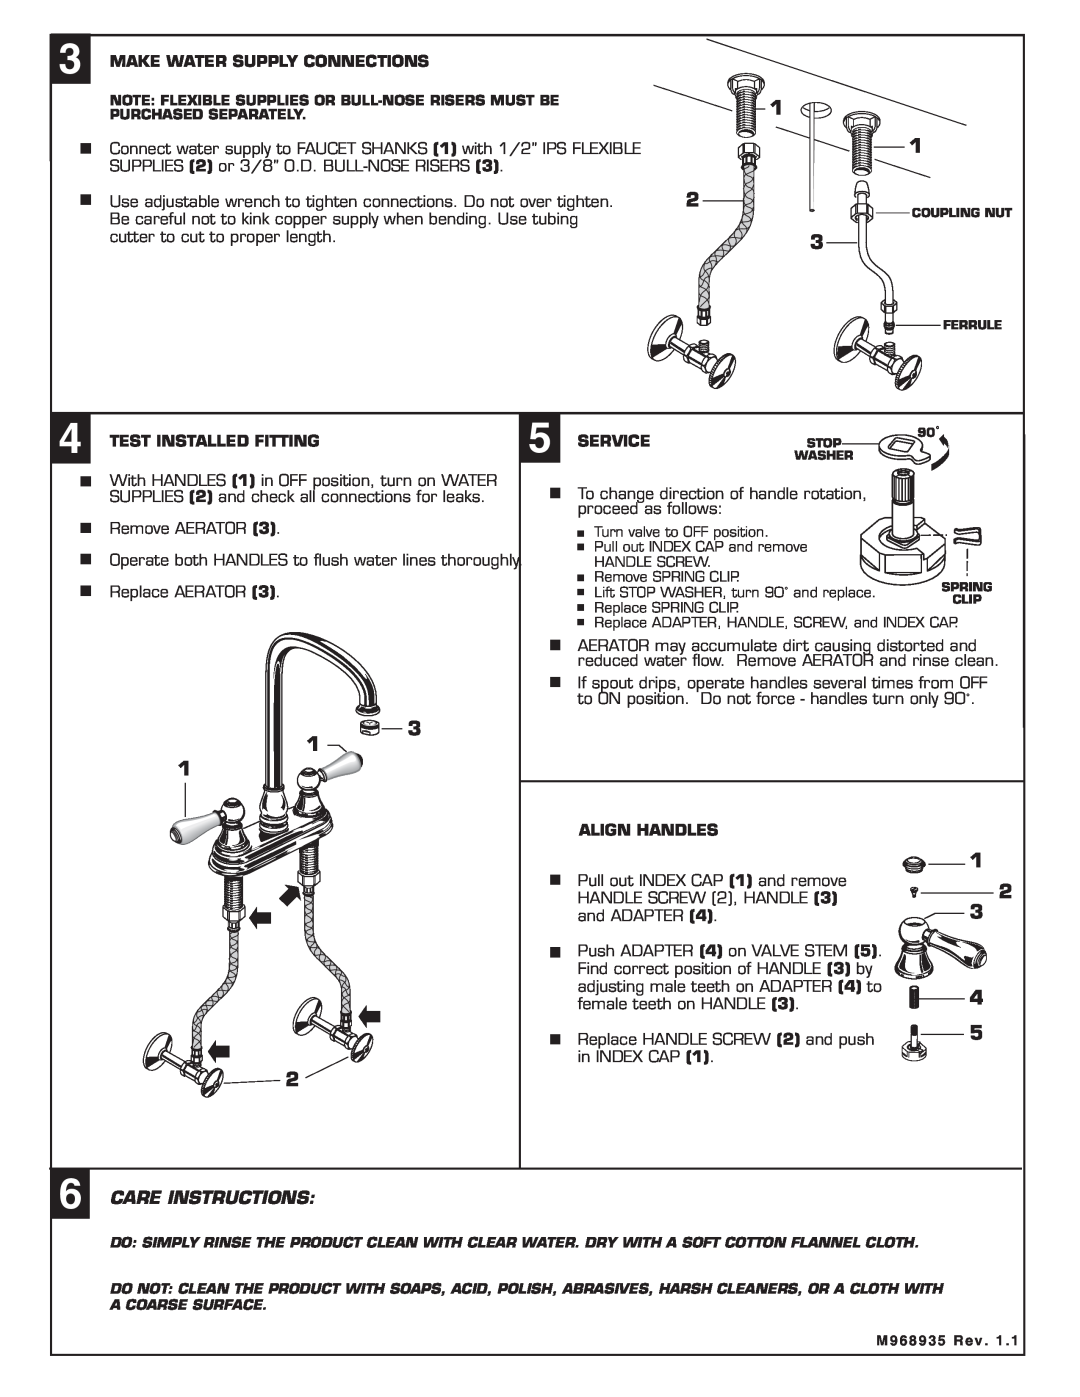 American Standard 3770 Make Water Supply Connections, Test Installed Fitting, Service, Align Handles, Care Instructions 